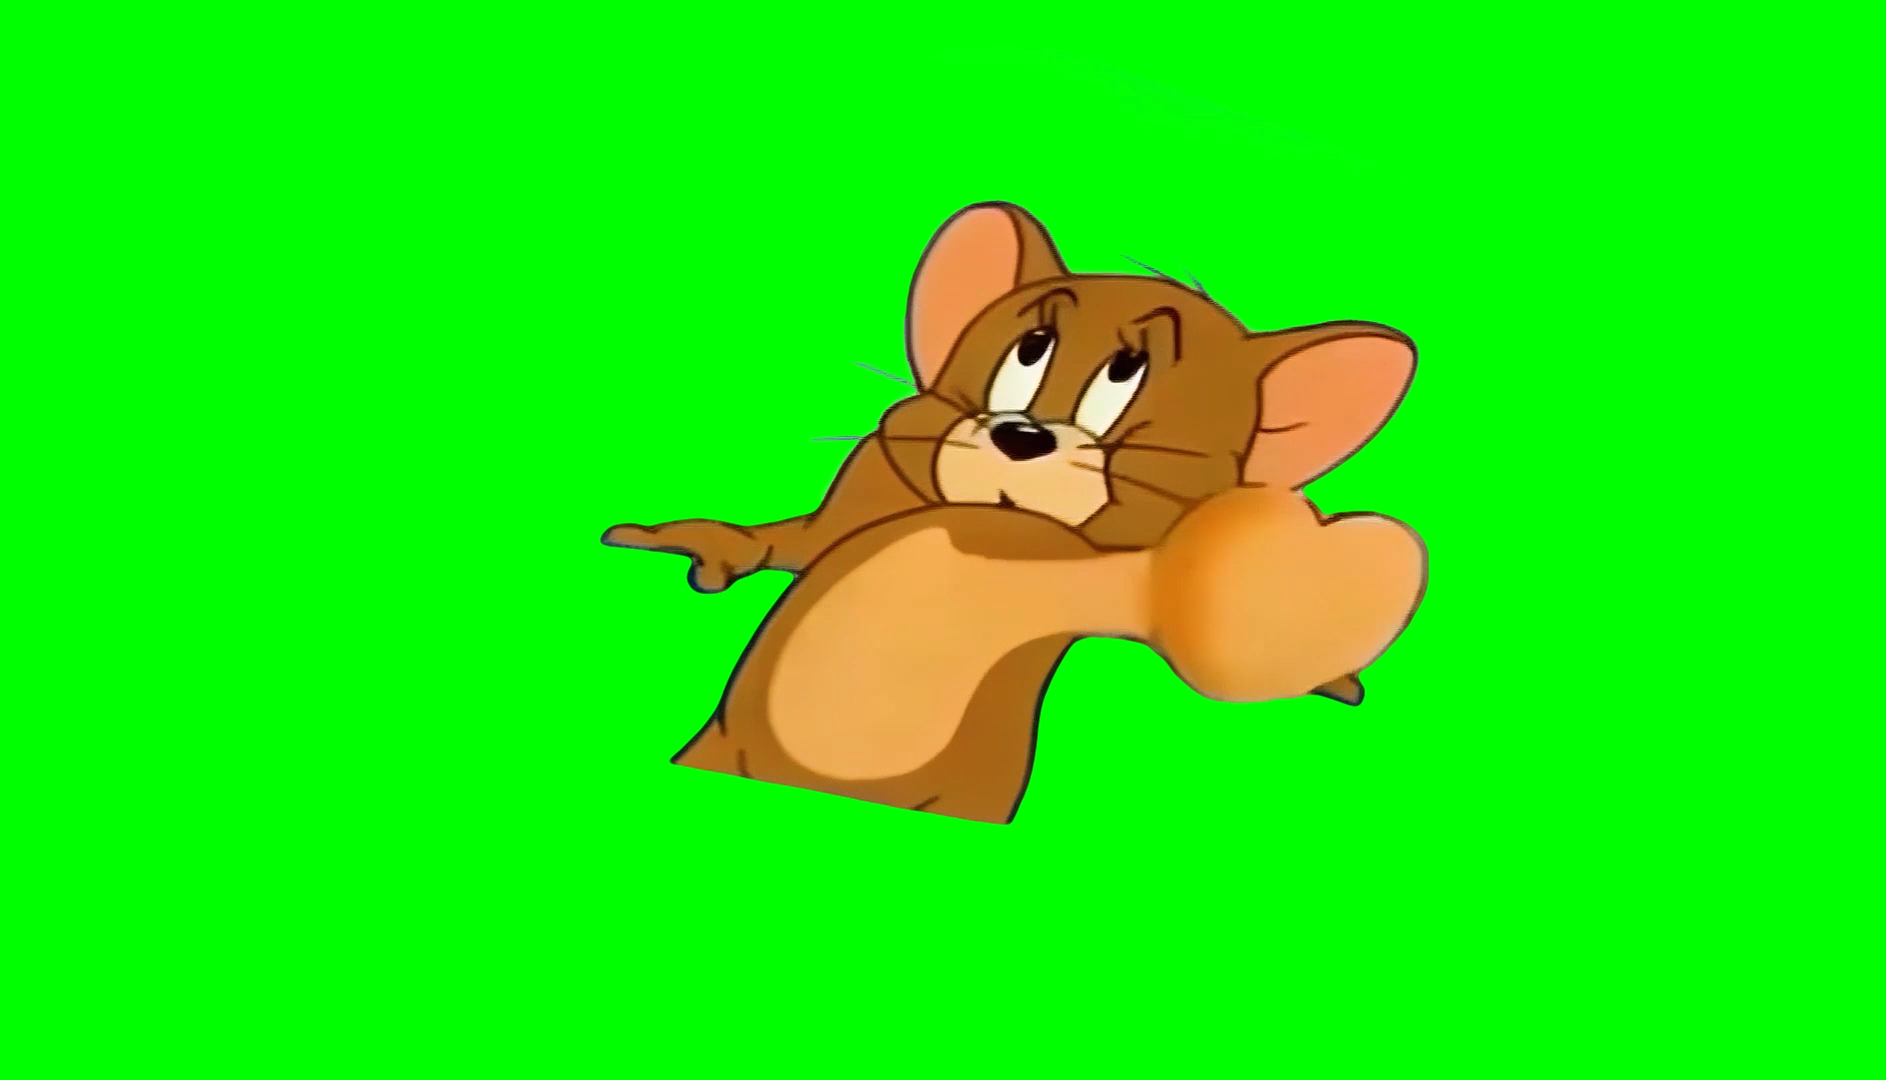 Jerry Heart Beating meme - Tom and Jerry (Green Screen)